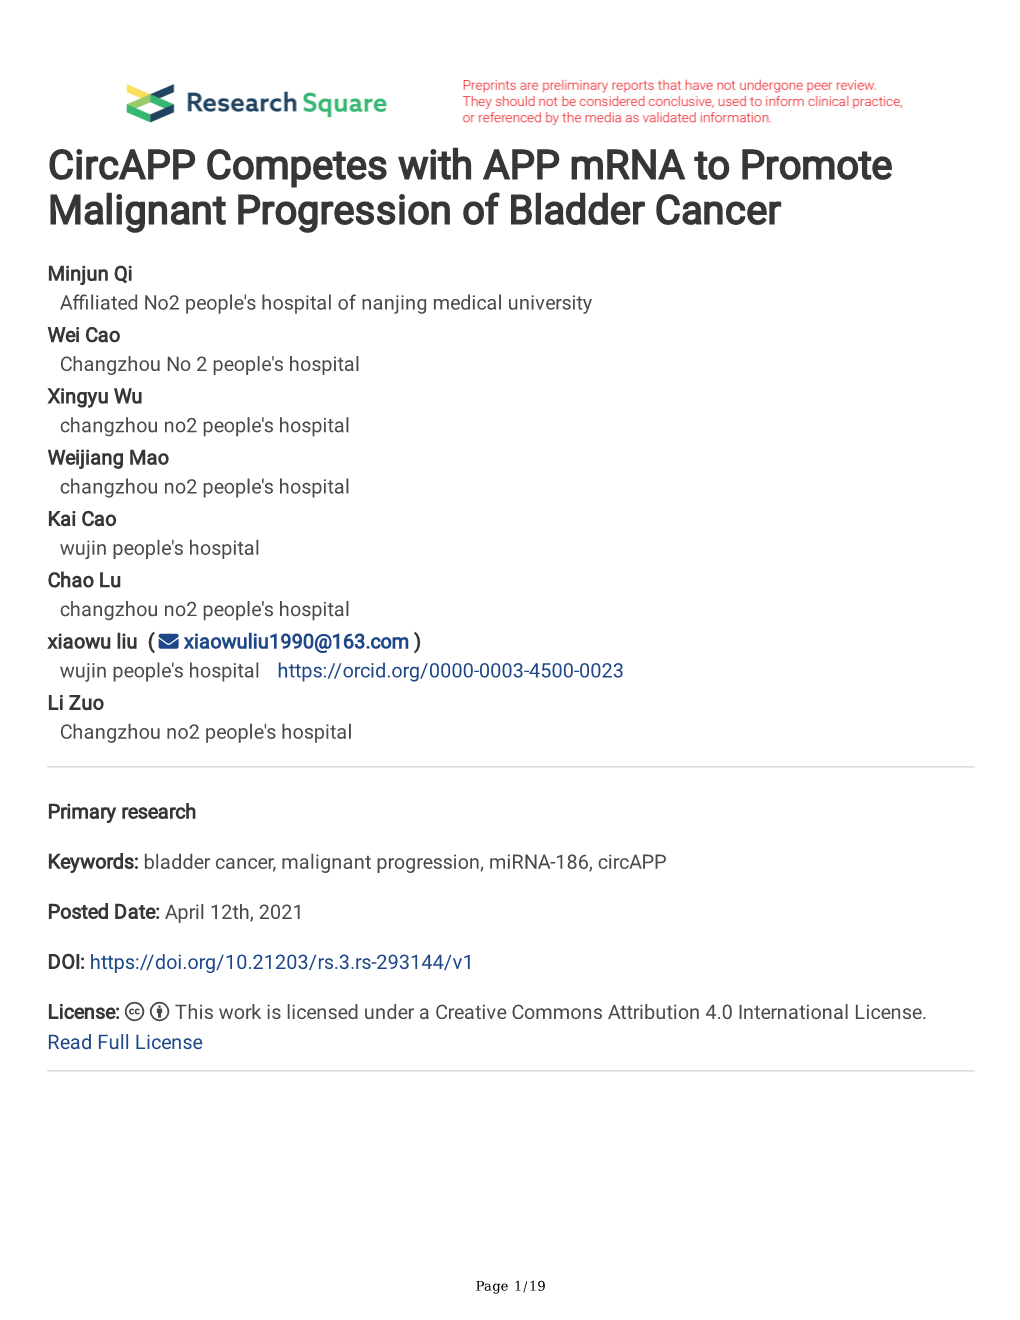 Circapp Competes with APP Mrna to Promote Malignant Progression of Bladder Cancer